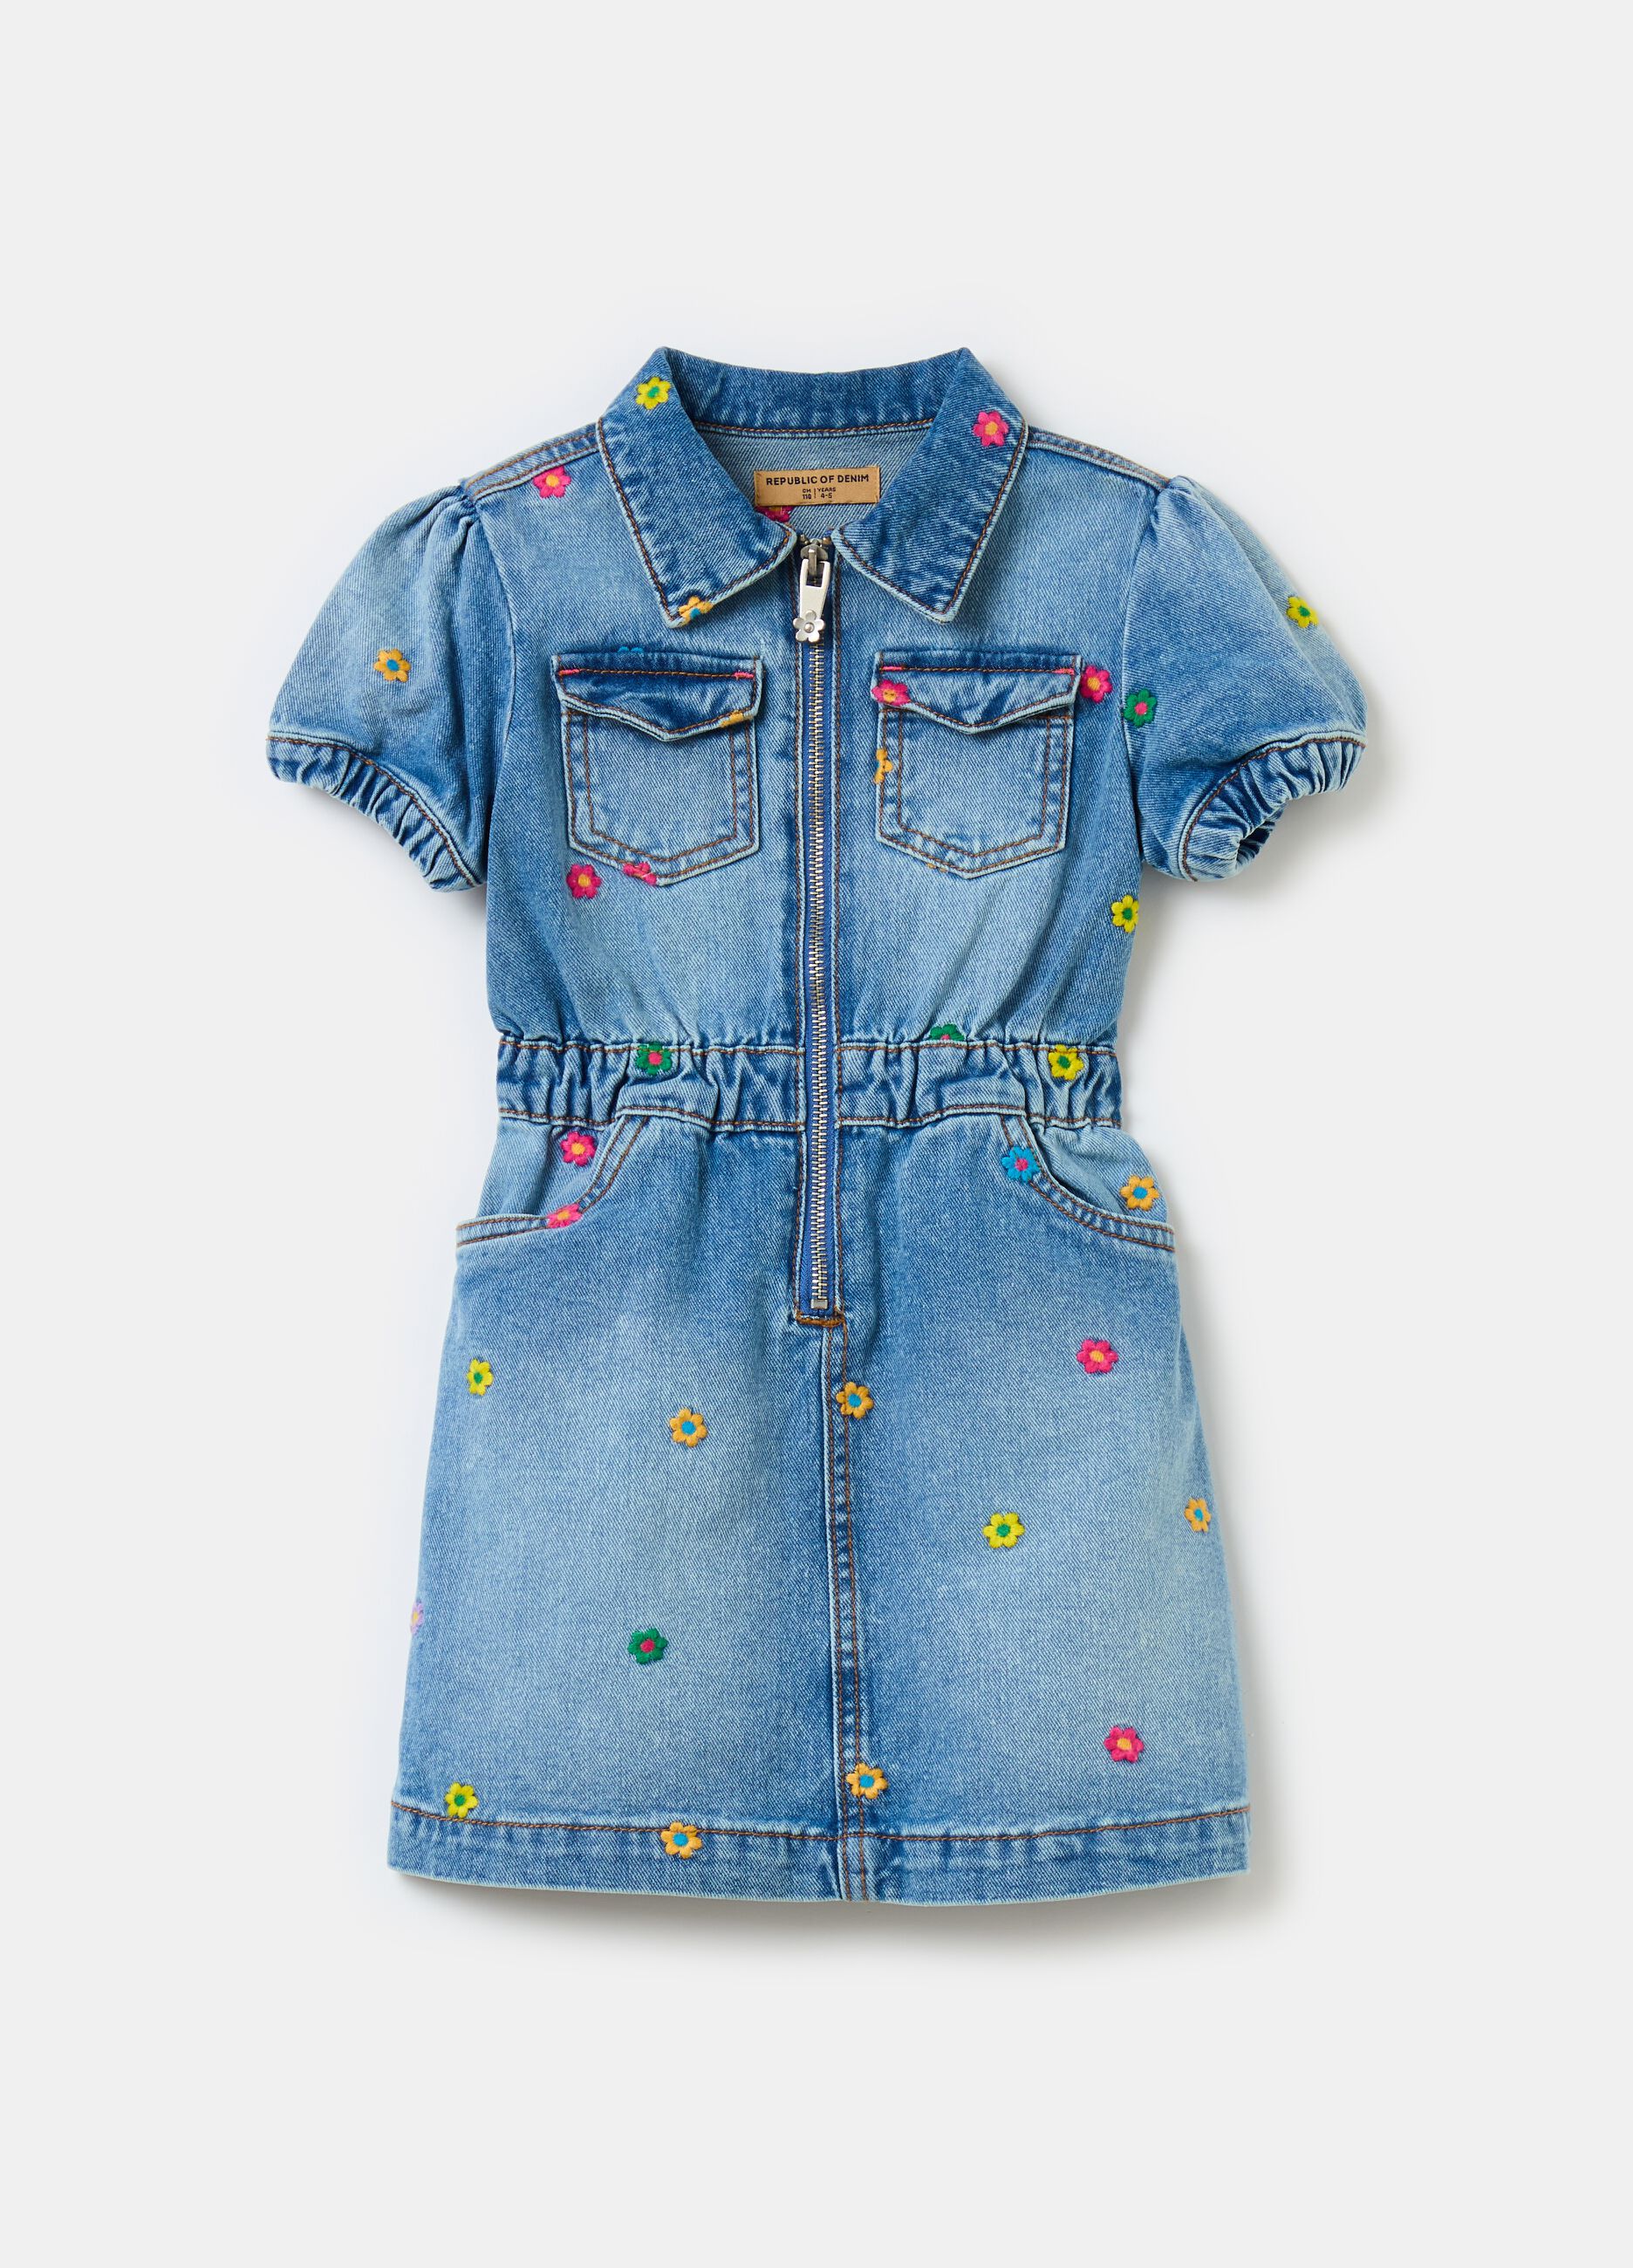 Denim dress with floral embroidery